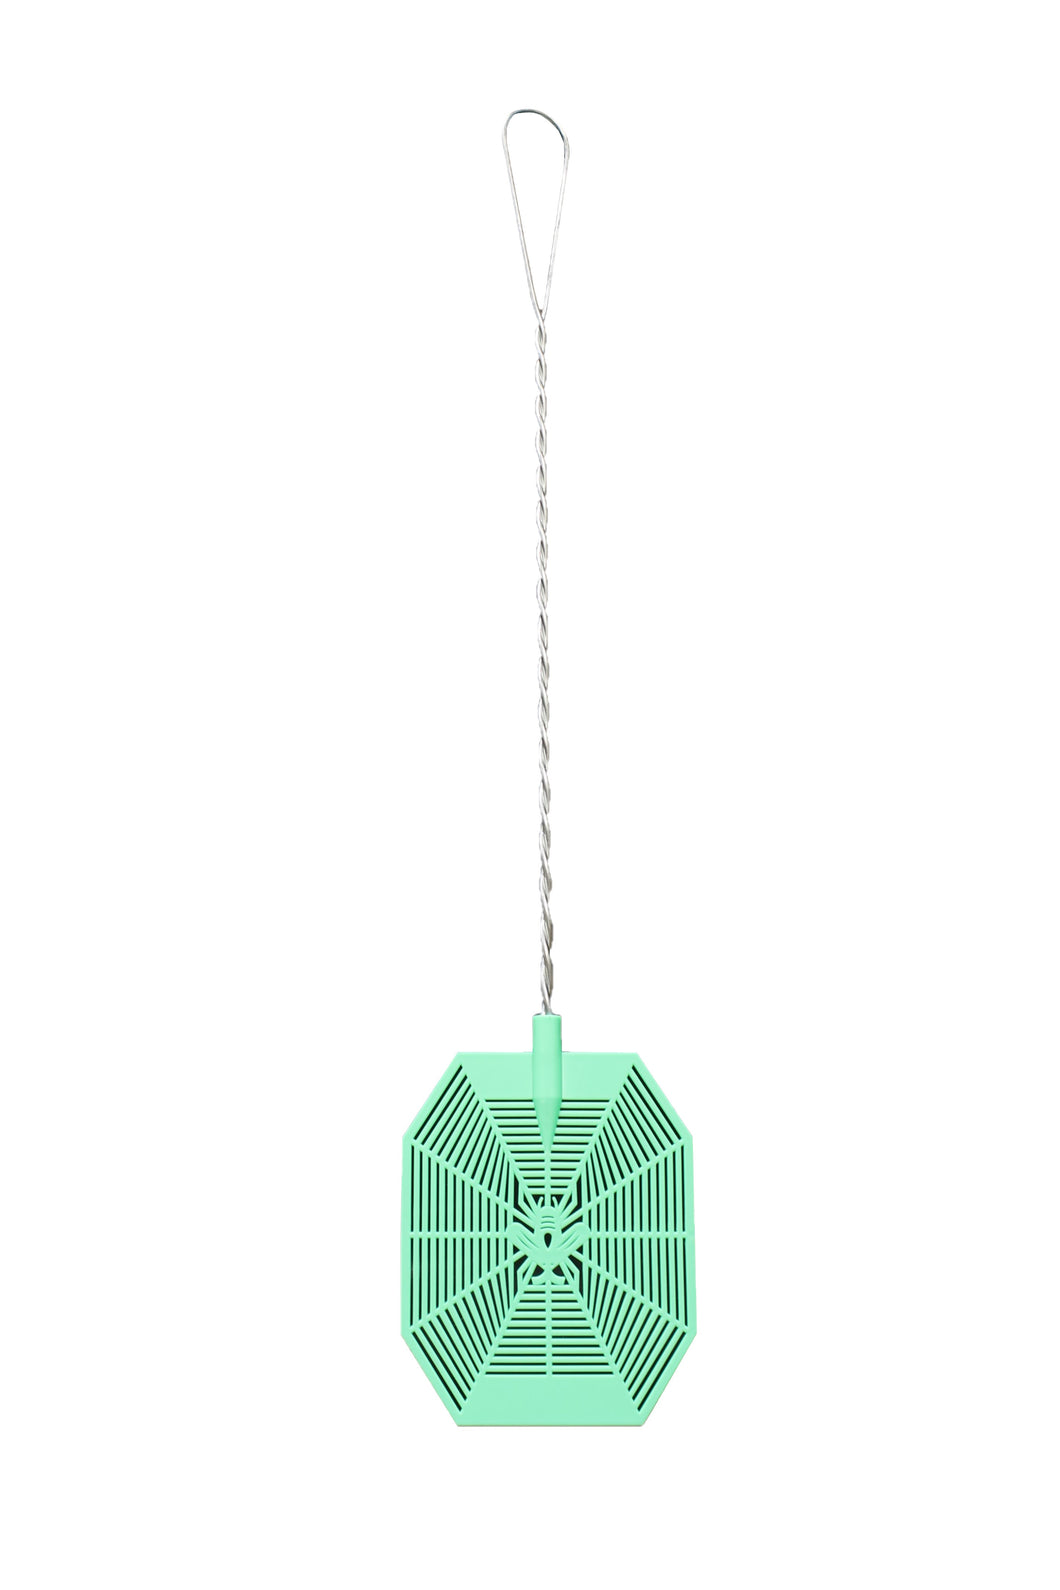 C.H.S Fly Swatter Green with metal handle